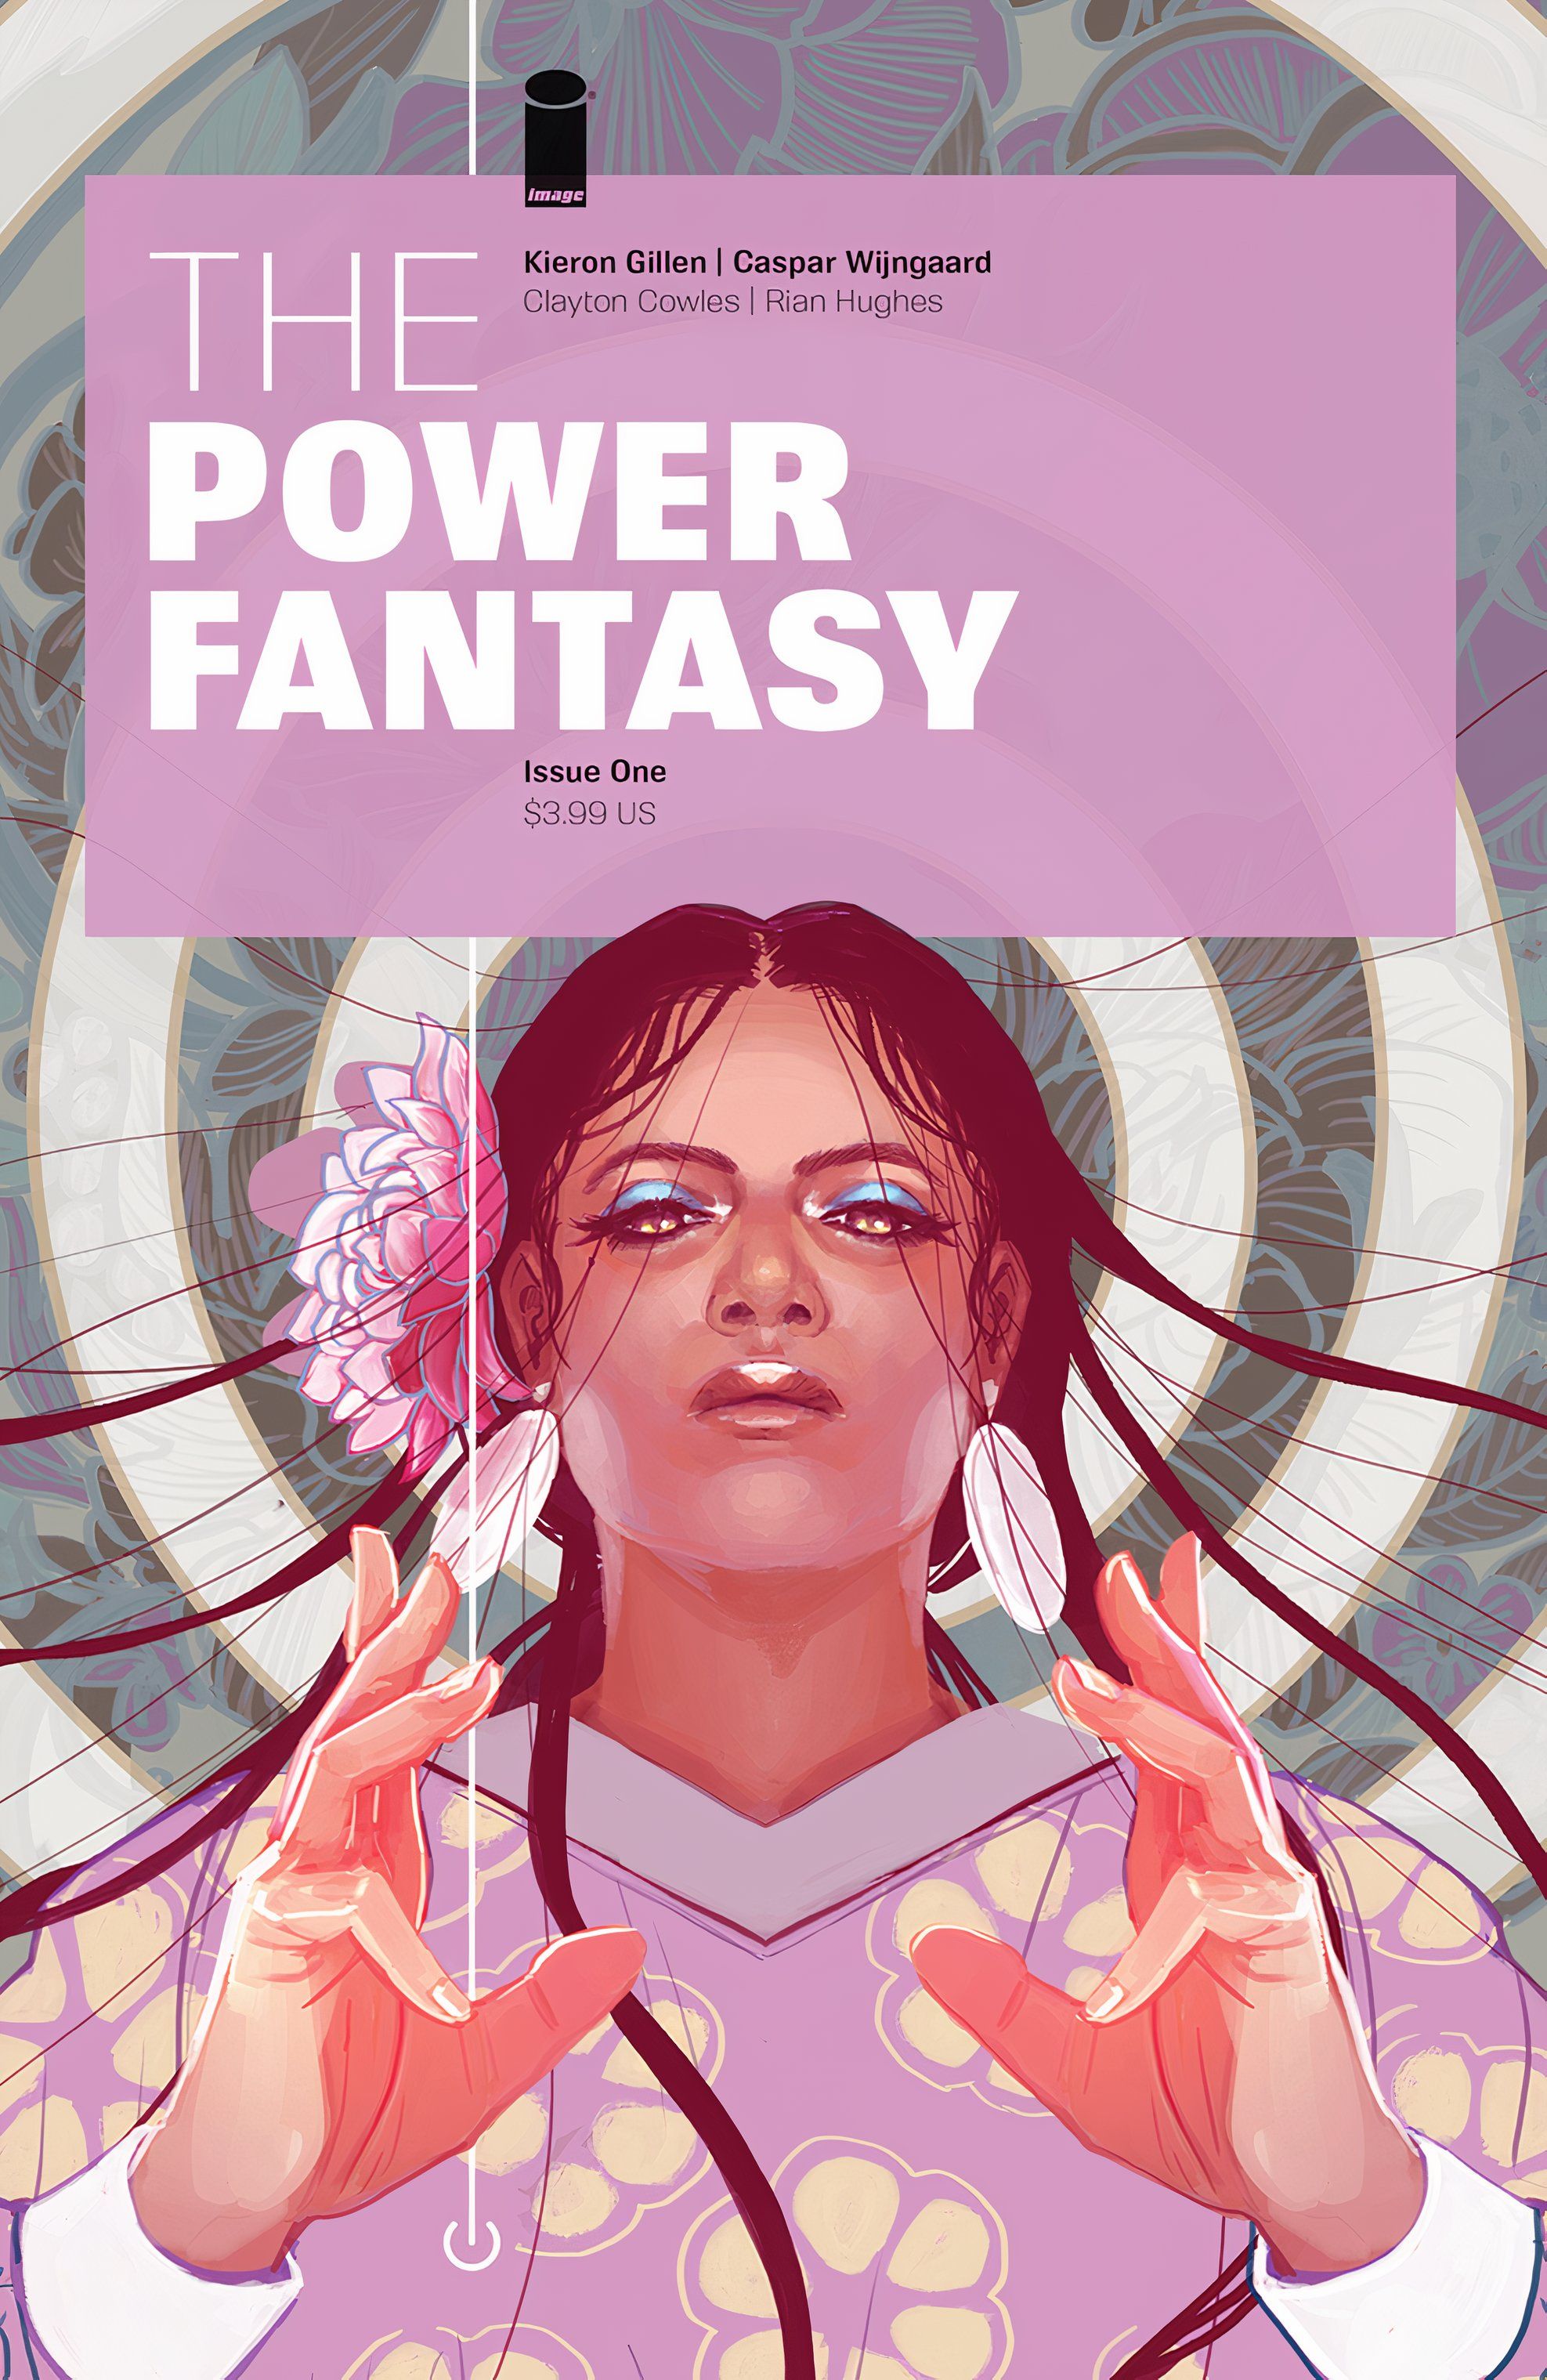 Power Fantasy #1 variant cover, character in purple flower blouse wielding superpowers